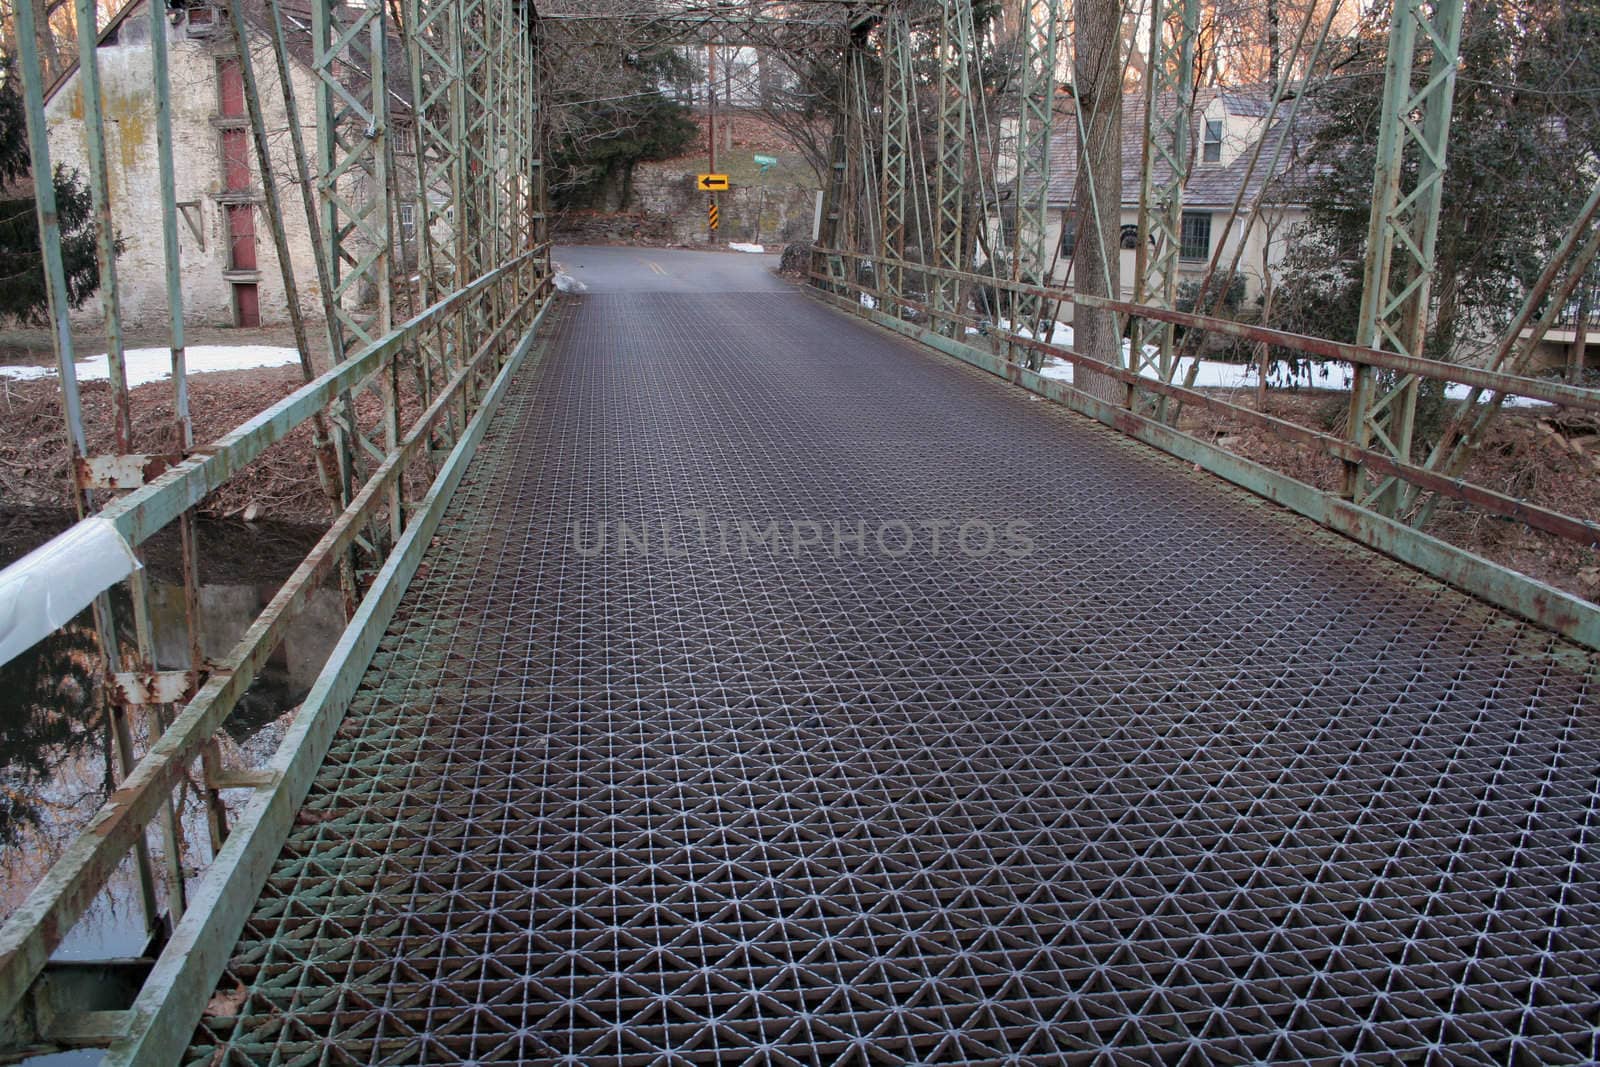 Vintage Metal Bridge and Roadway
 by ca2hill